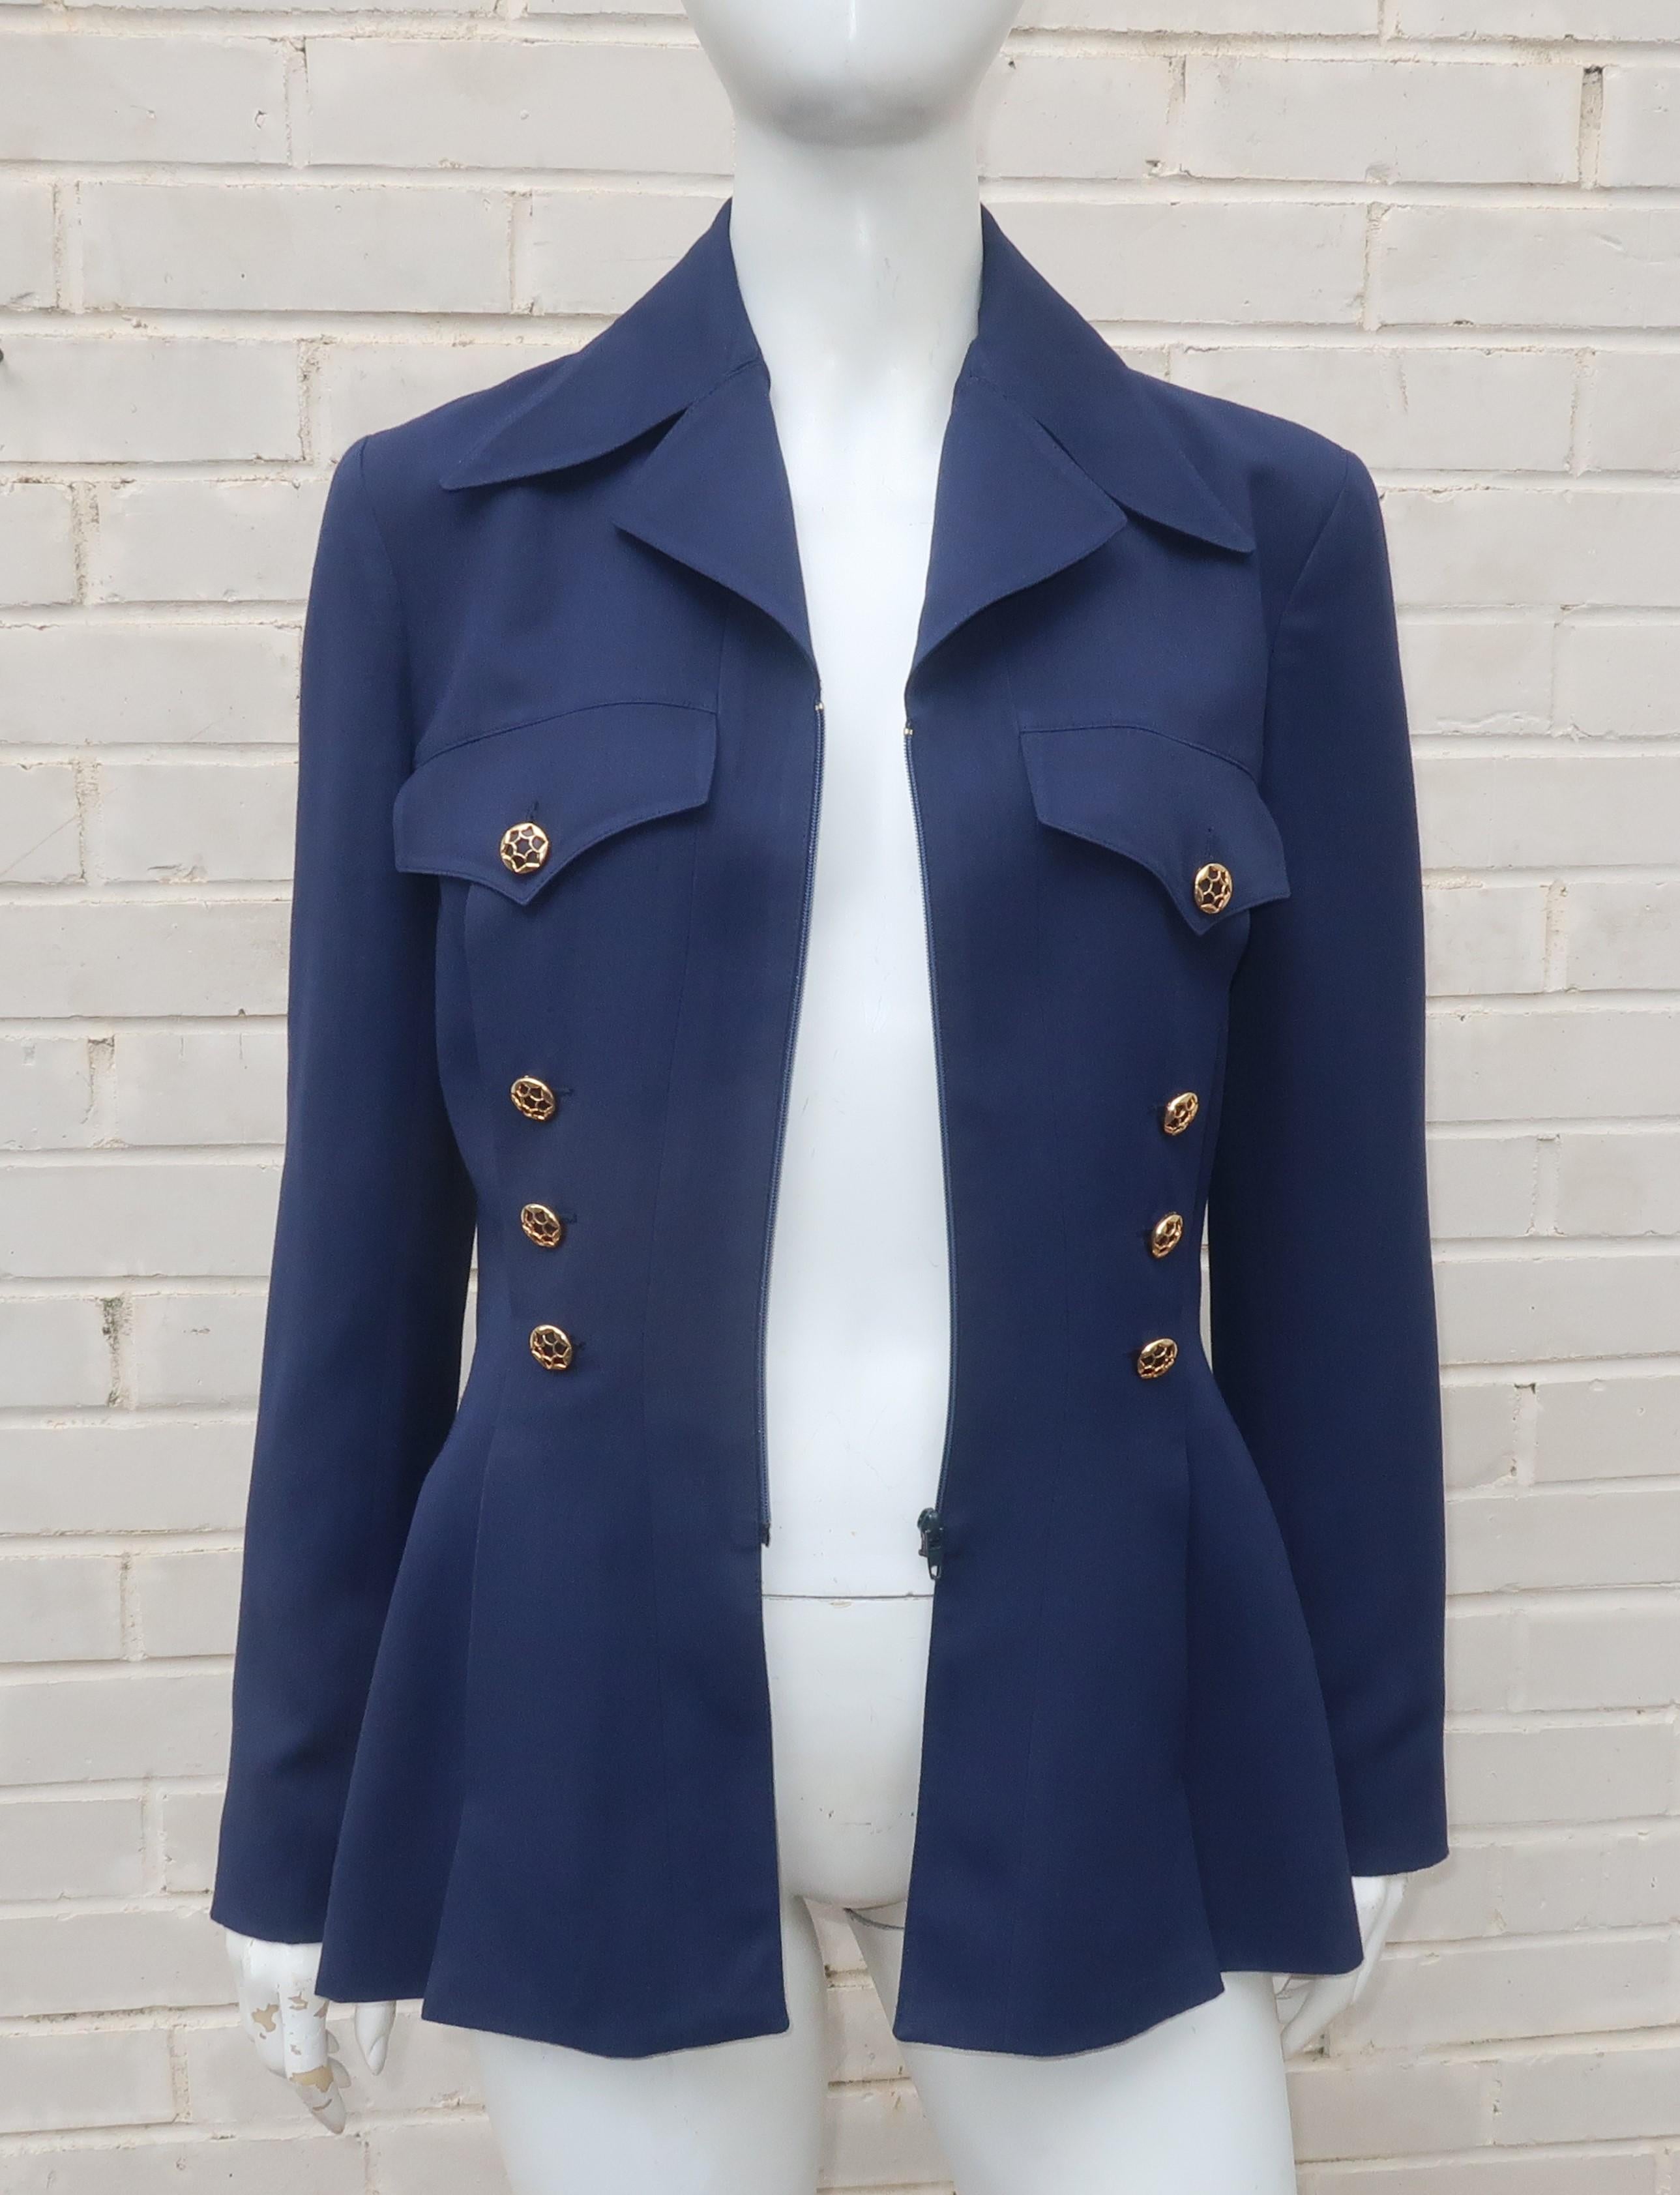 Karl Lagerfeld Navy Blue Skirt Suit With Gold Buttons 3